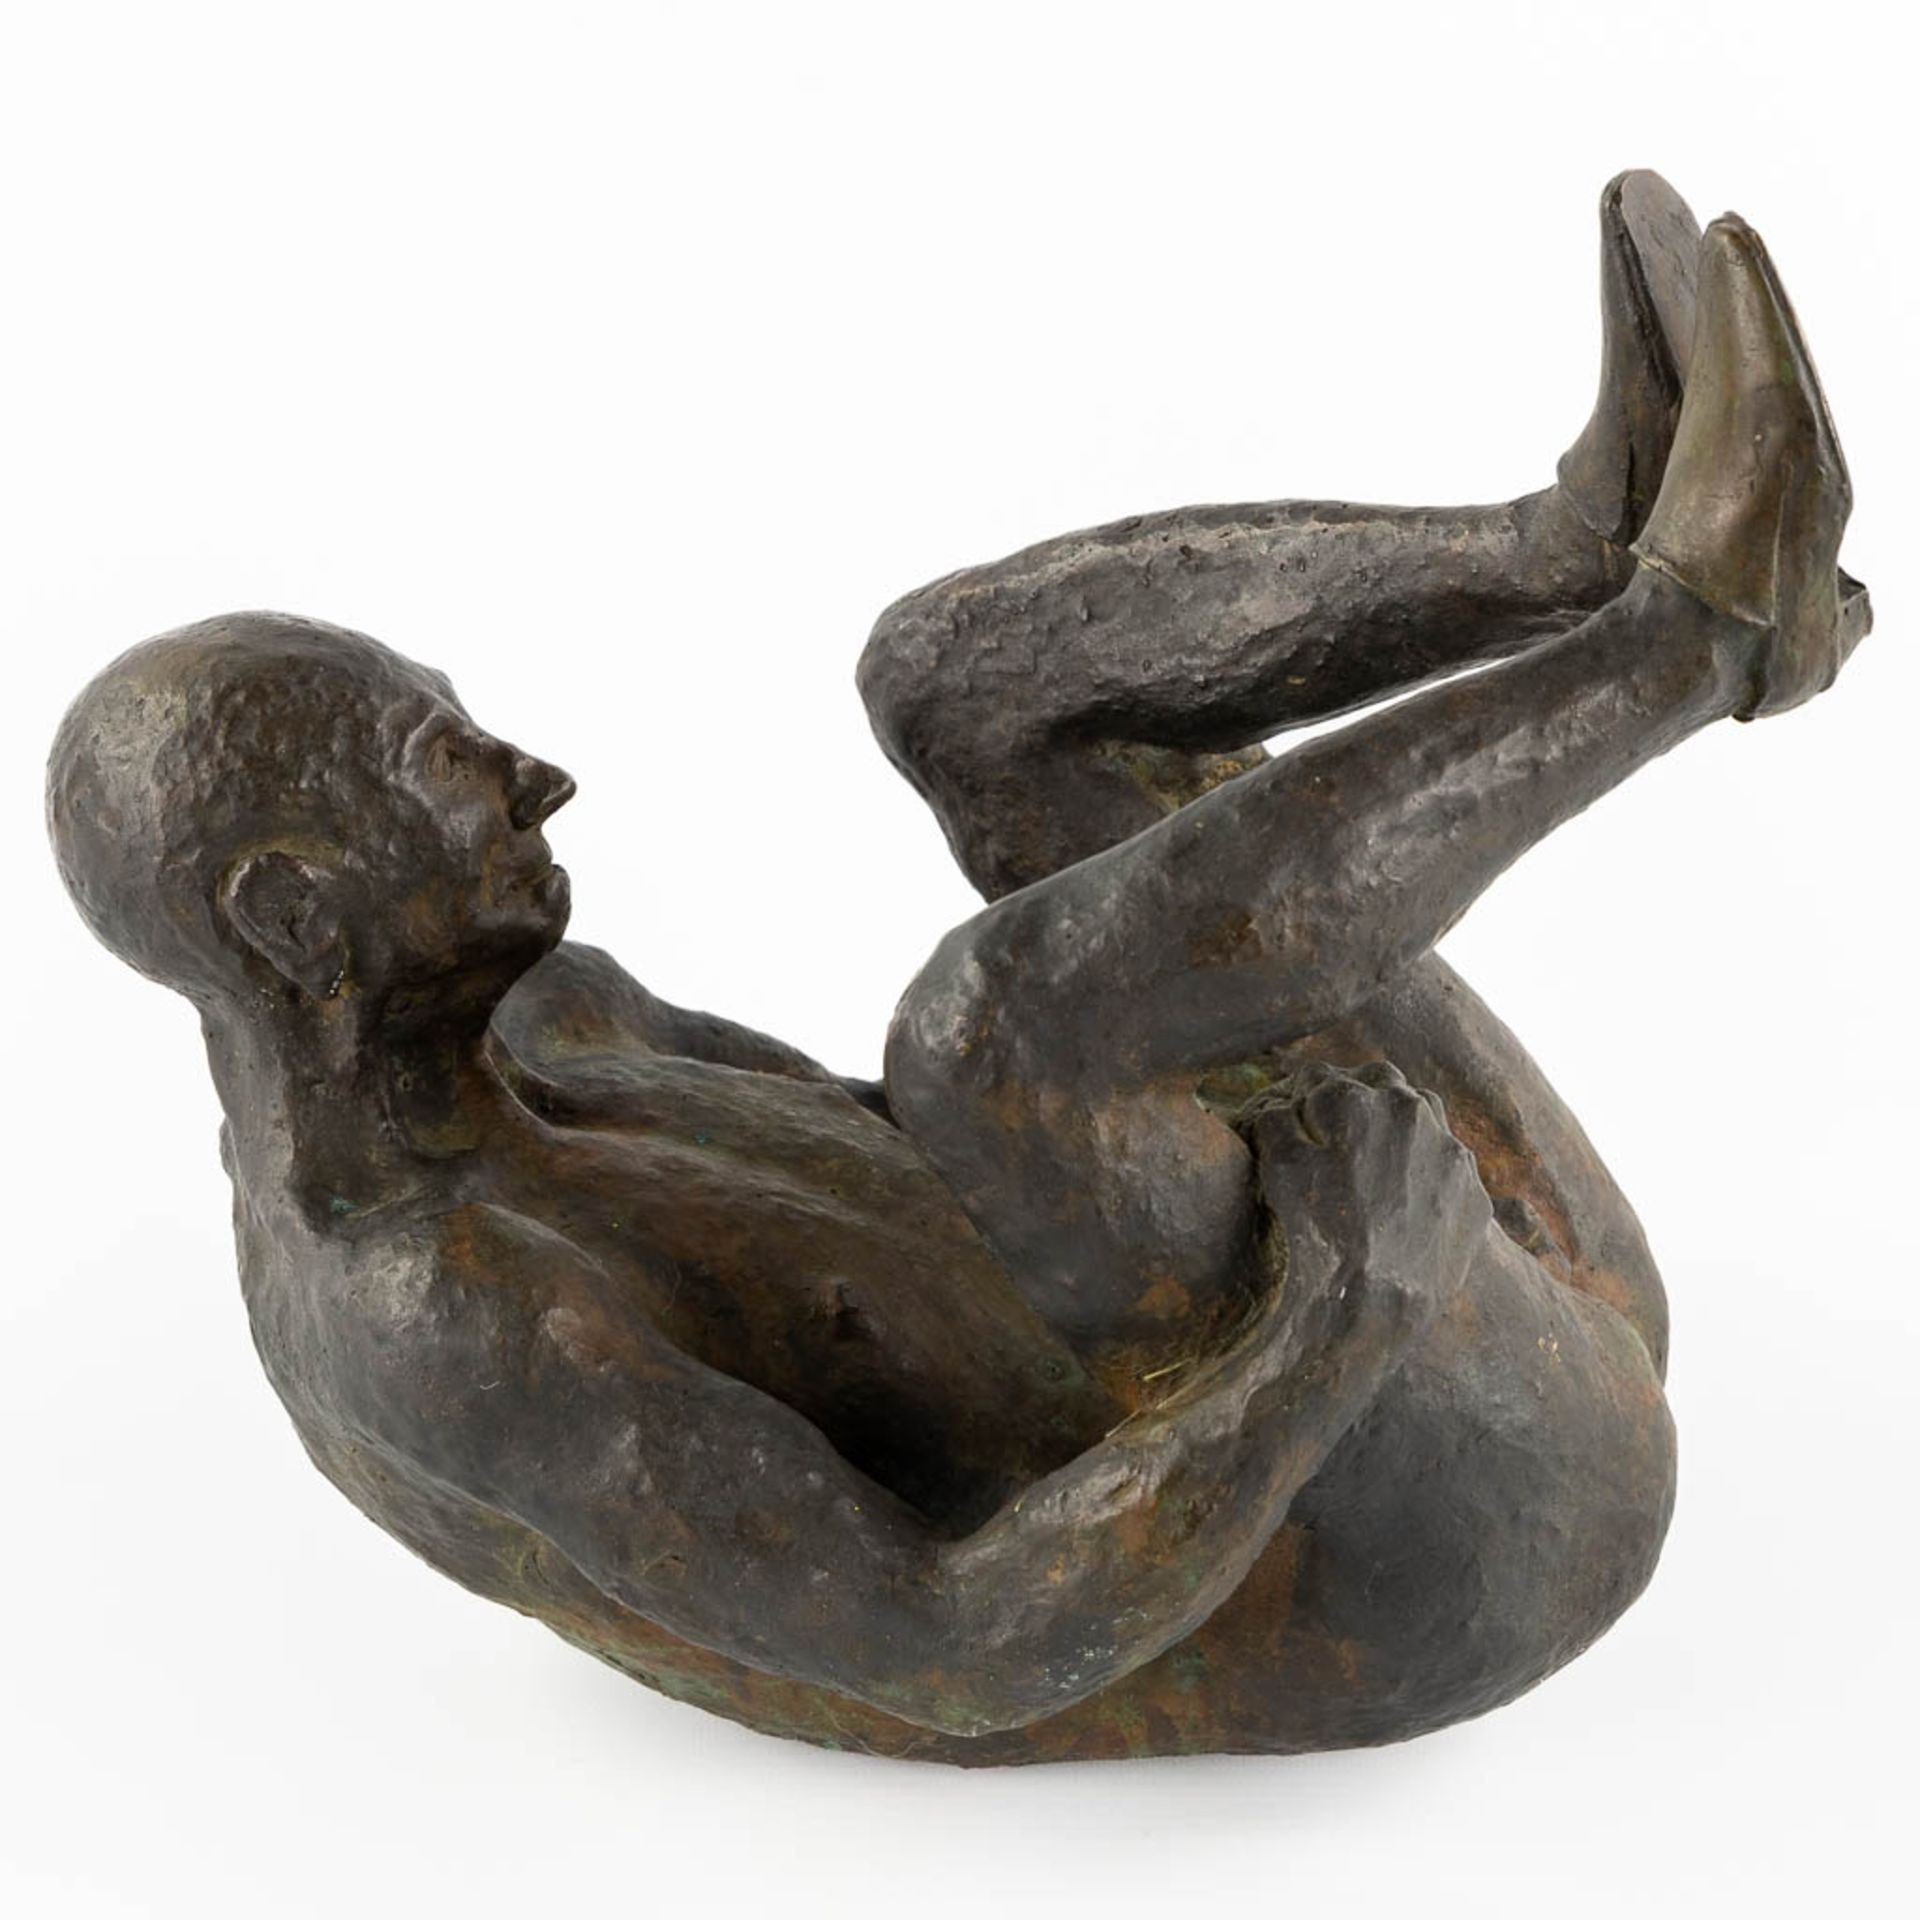 An Exposed Male figure' patinated bronze. (L:22 x W:30 x H:29 cm) - Image 3 of 9